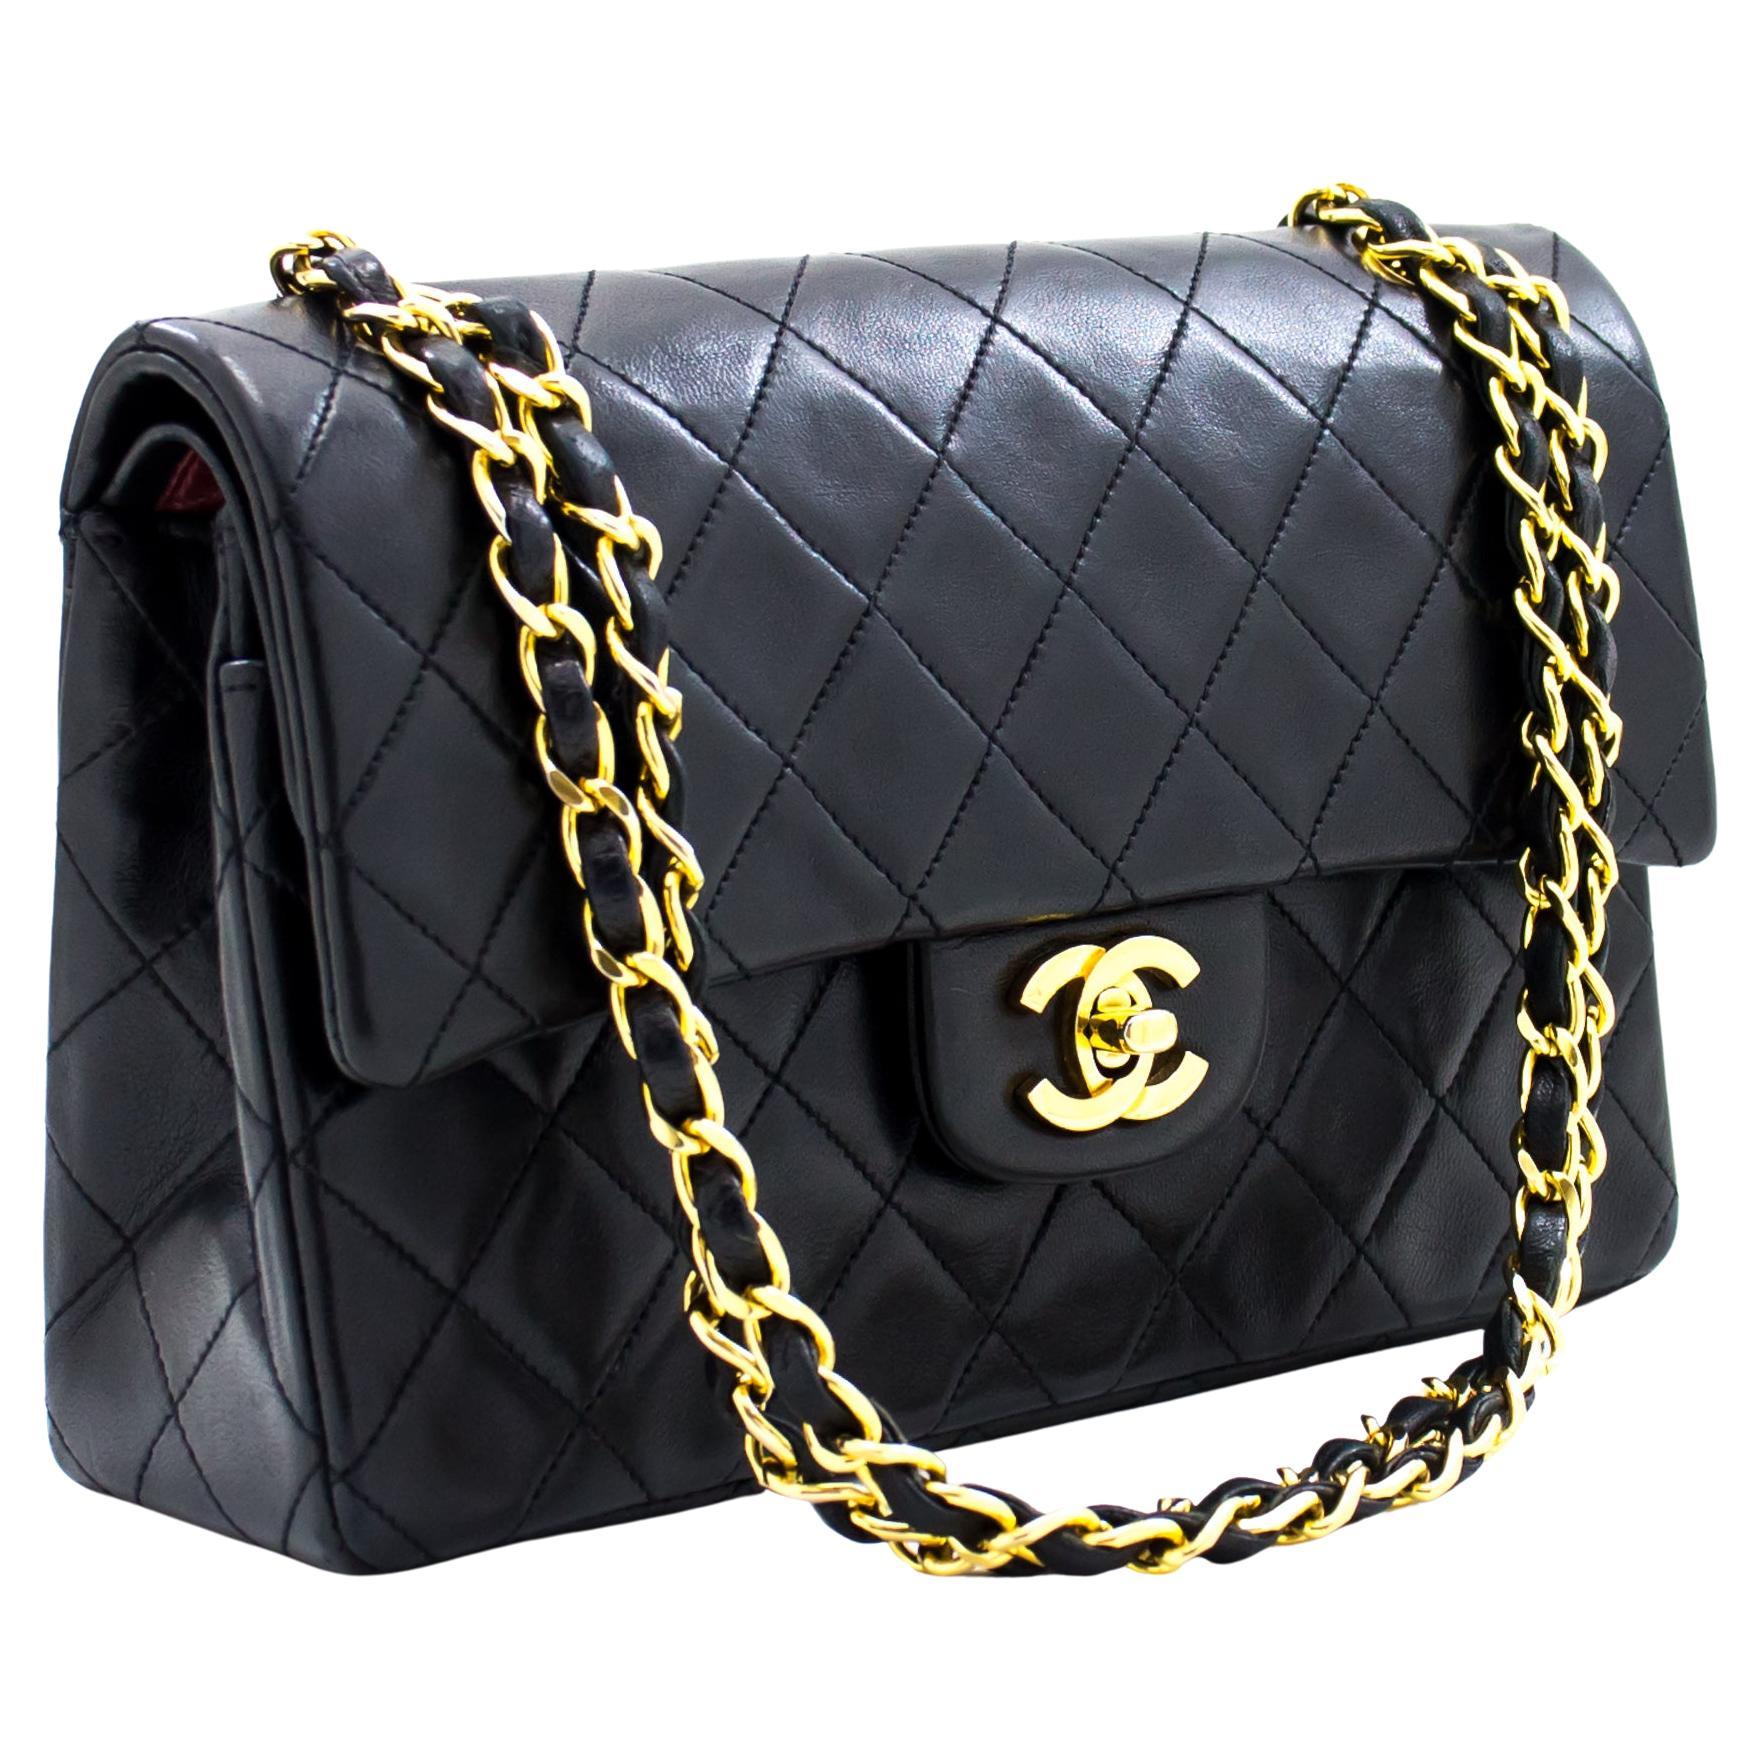 Do Chanel bags come with tags?